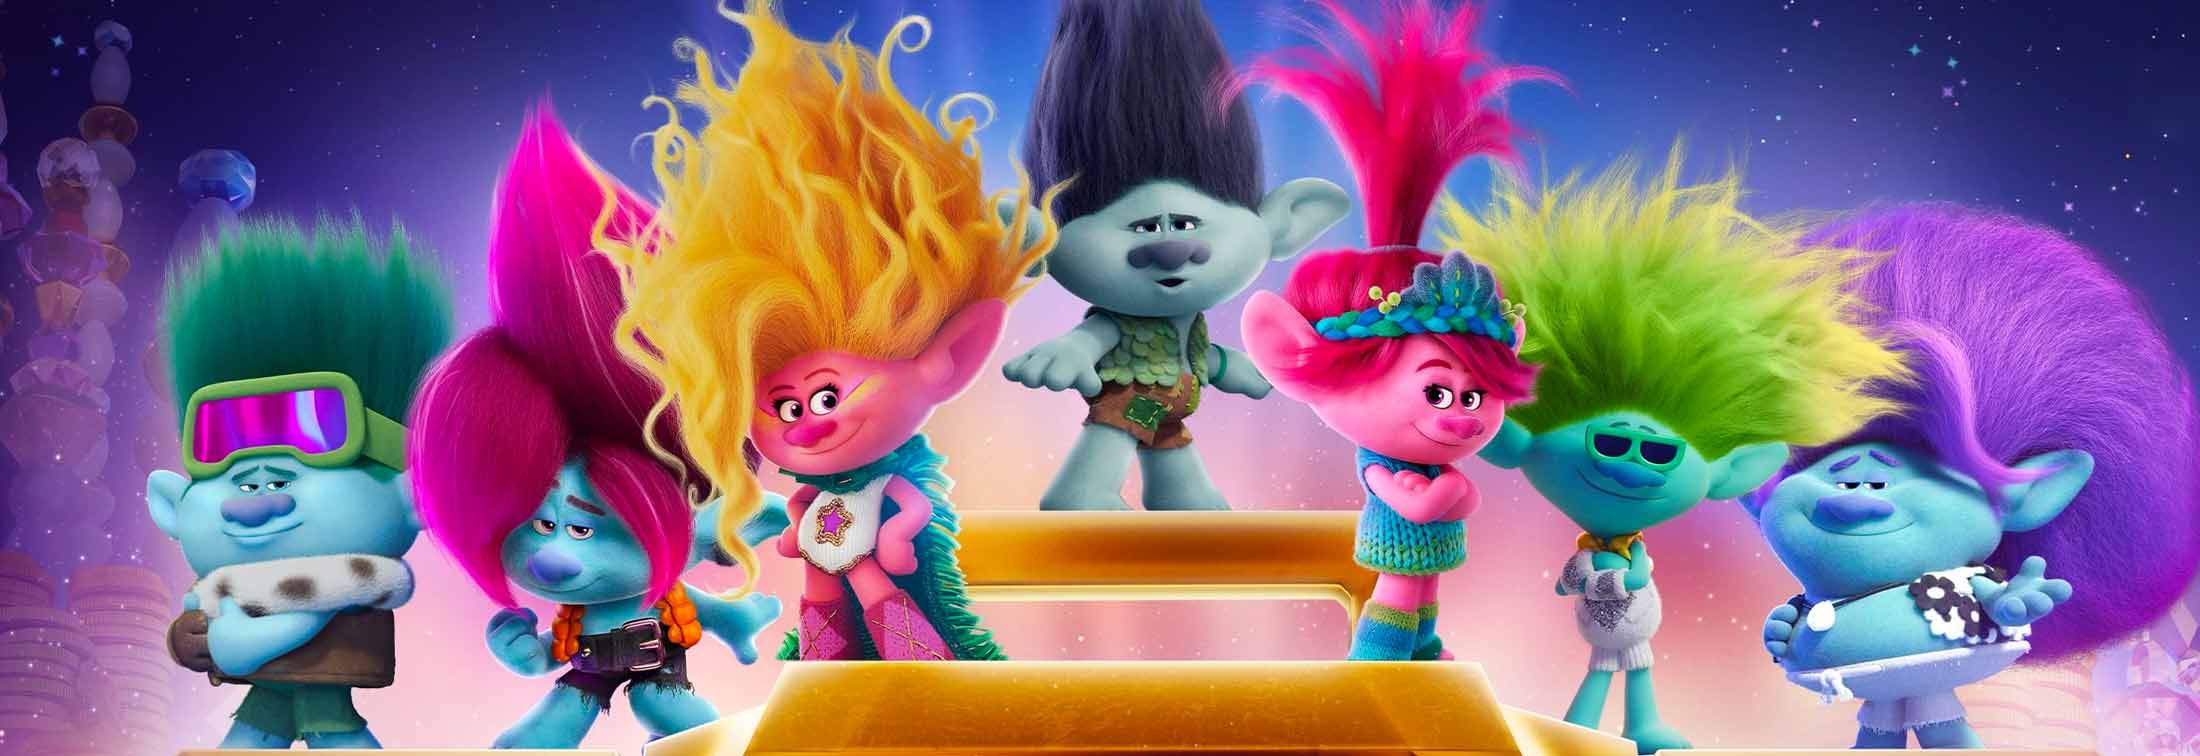 Trolls Band Together Review: Poppy And Branch Back For A Third Trip 